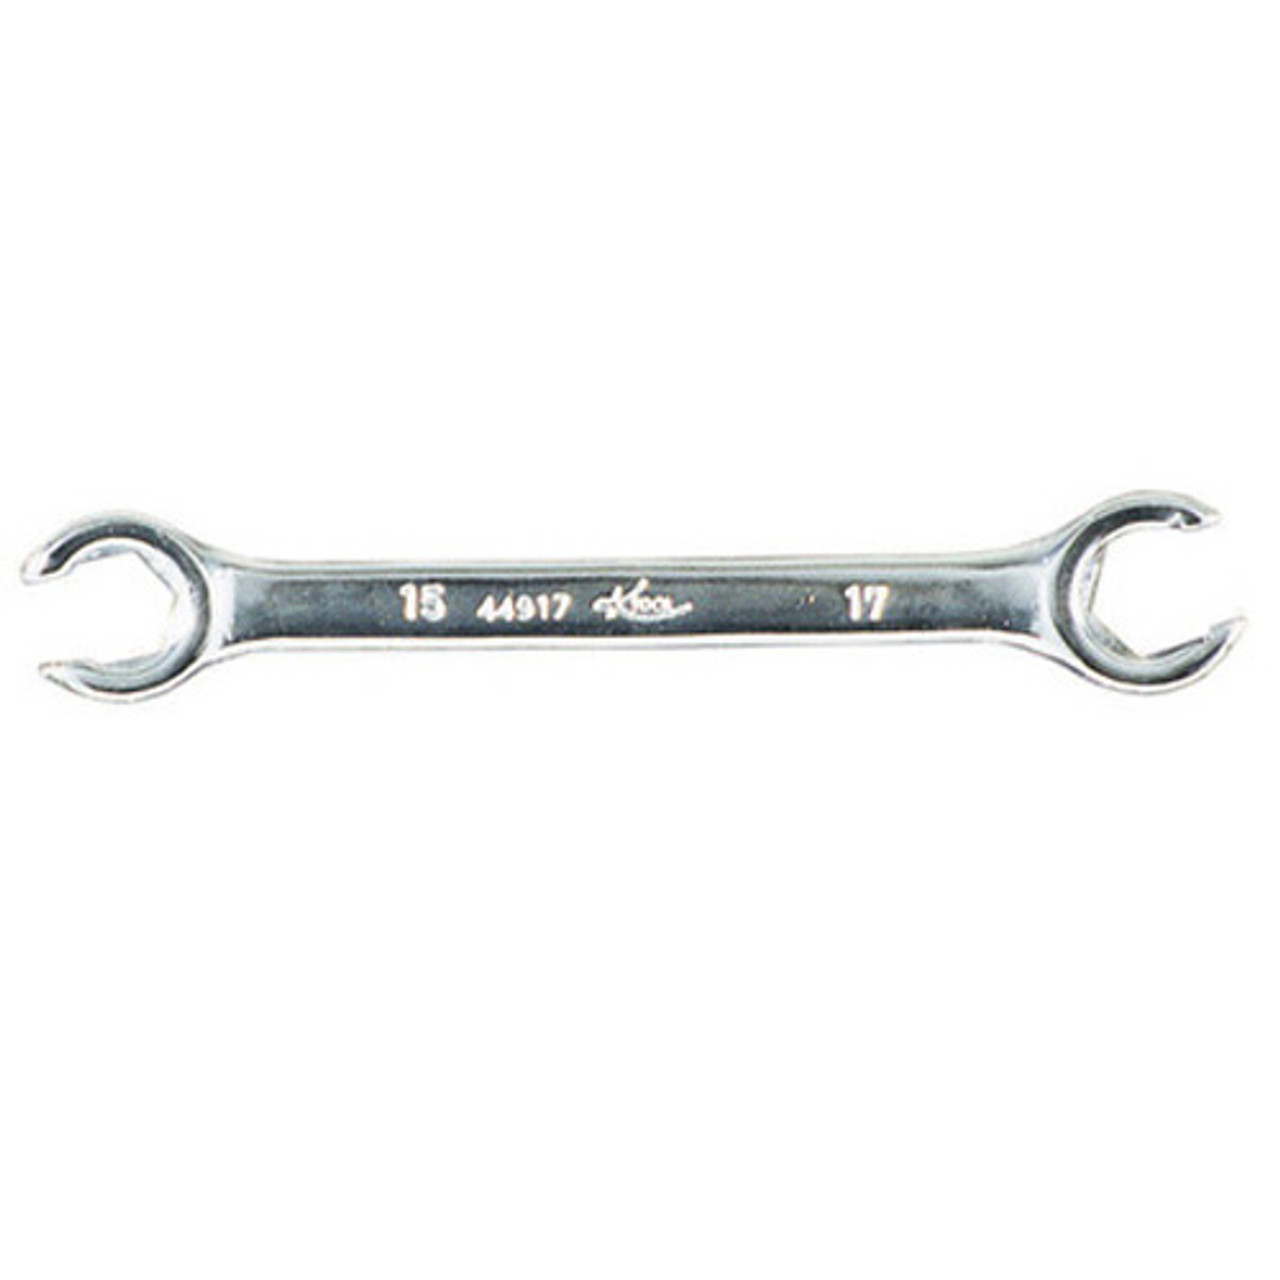 17mm 12 Point K Tool 41817 Combination Wrench High Polish 